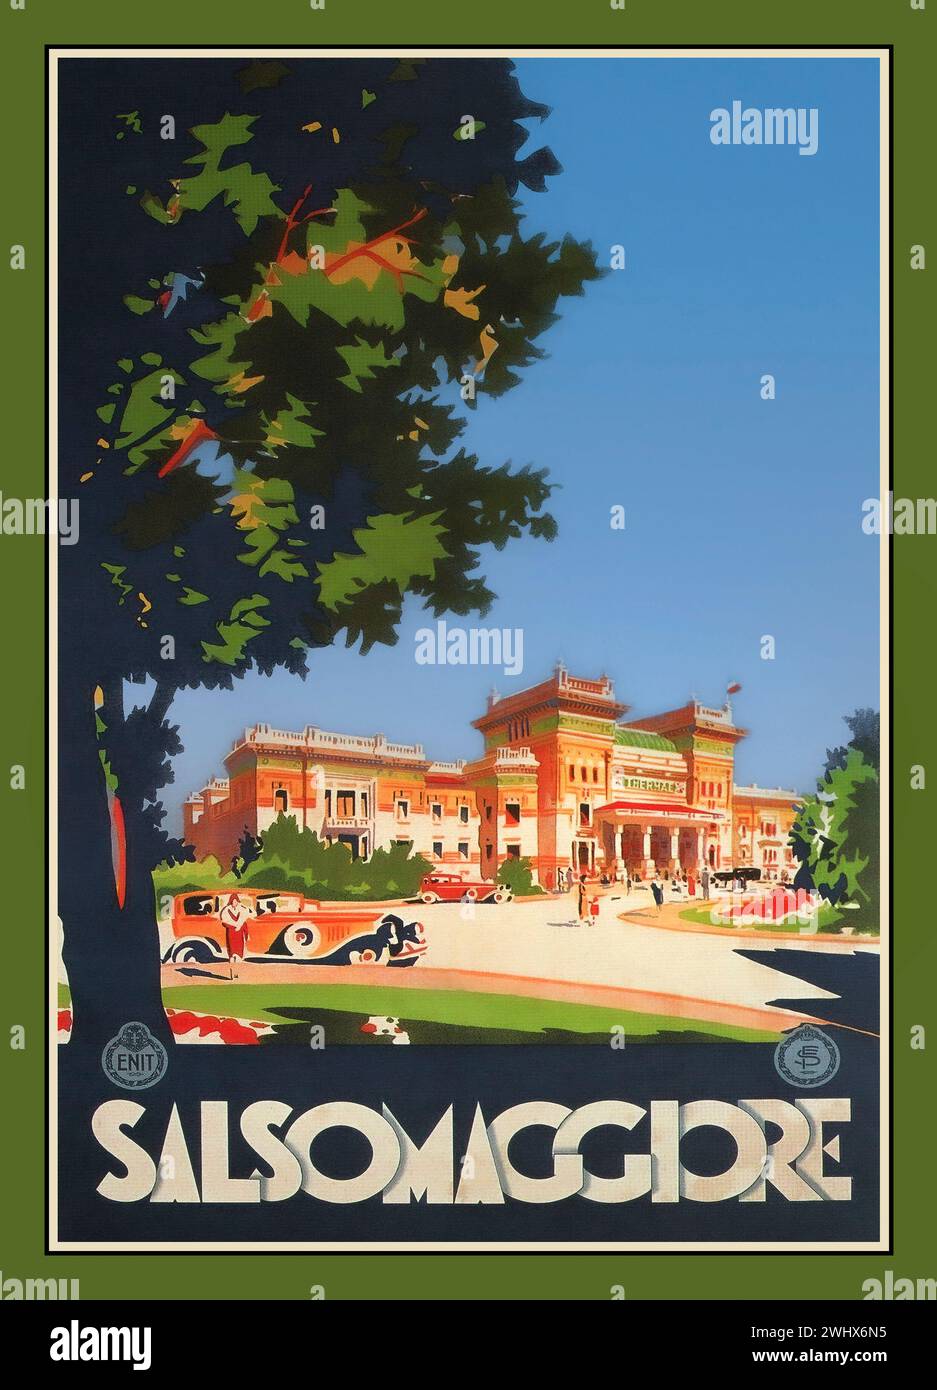 Vintage Travel Poster 'SALSOMAGGIORE' Italy ENIT official Italian 1920s Travel Poster. Salsomaggiore Terme is a town and comune located in the Italian province of Parma, in the region of Emilia-Romagna. Located at the foot of the Apennines, a notable spa town. Stock Photo